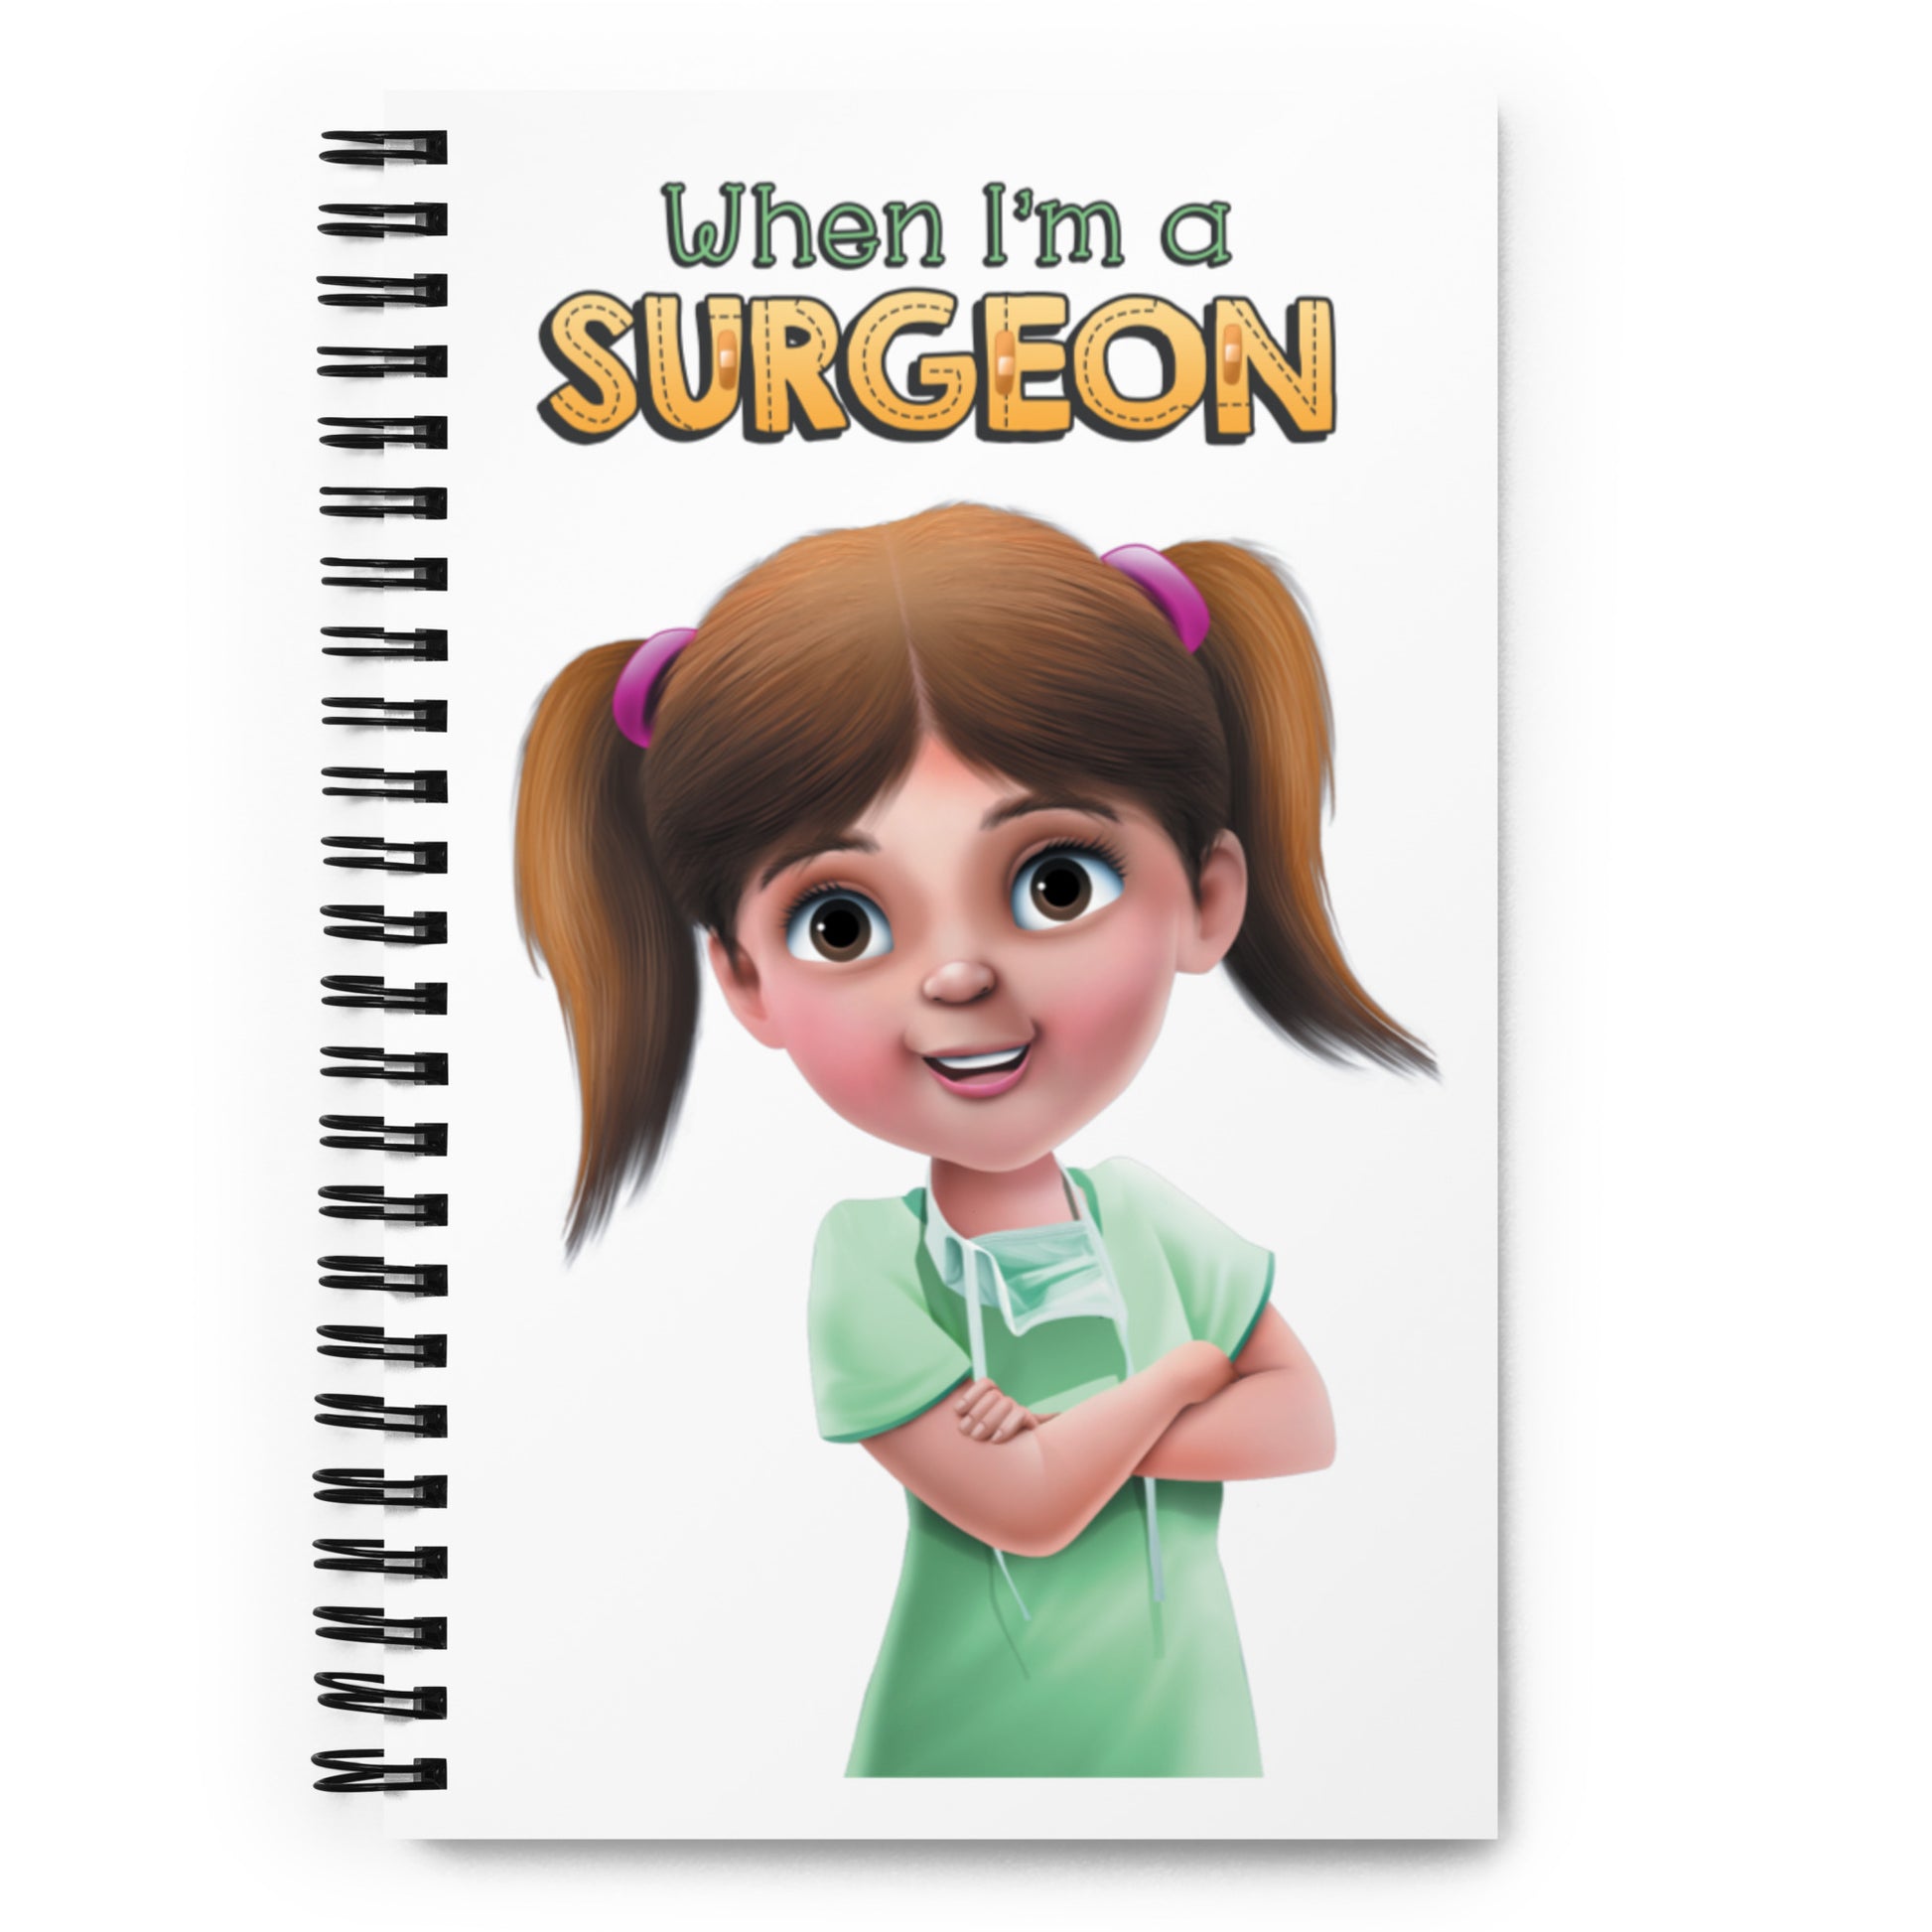 The best, cute, fun 140 page spiral notebook for a doctor or future surgeon.